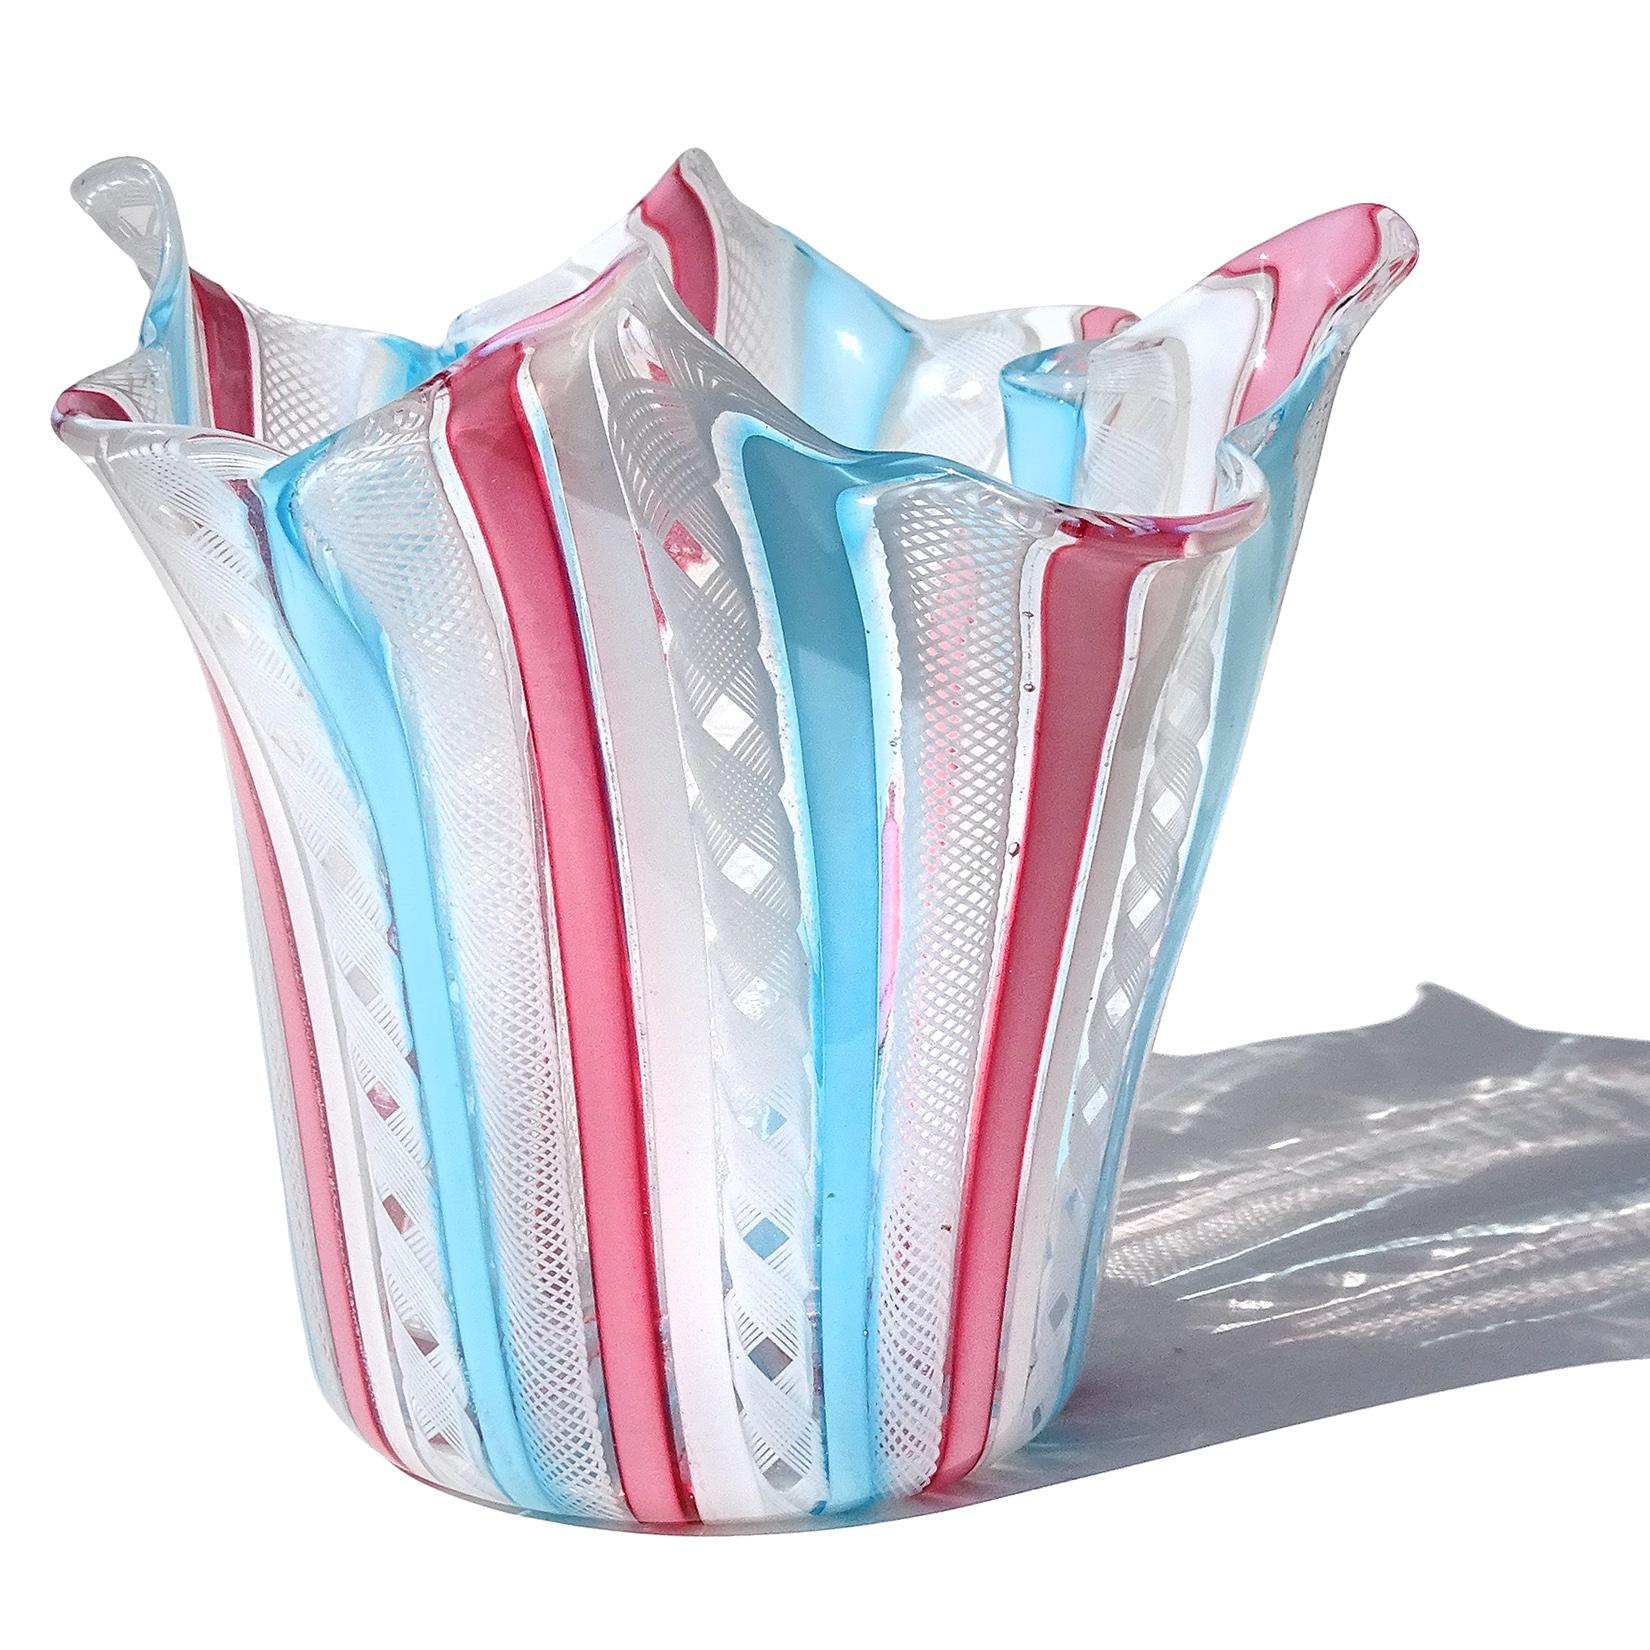 Gorgeous vintage Murano hand blown pink, sky blue, and white ribbons Italian art glass handkerchief / fazzoletto vase. Documented to the Fratelli Toso company. Made with pink, blue and white 